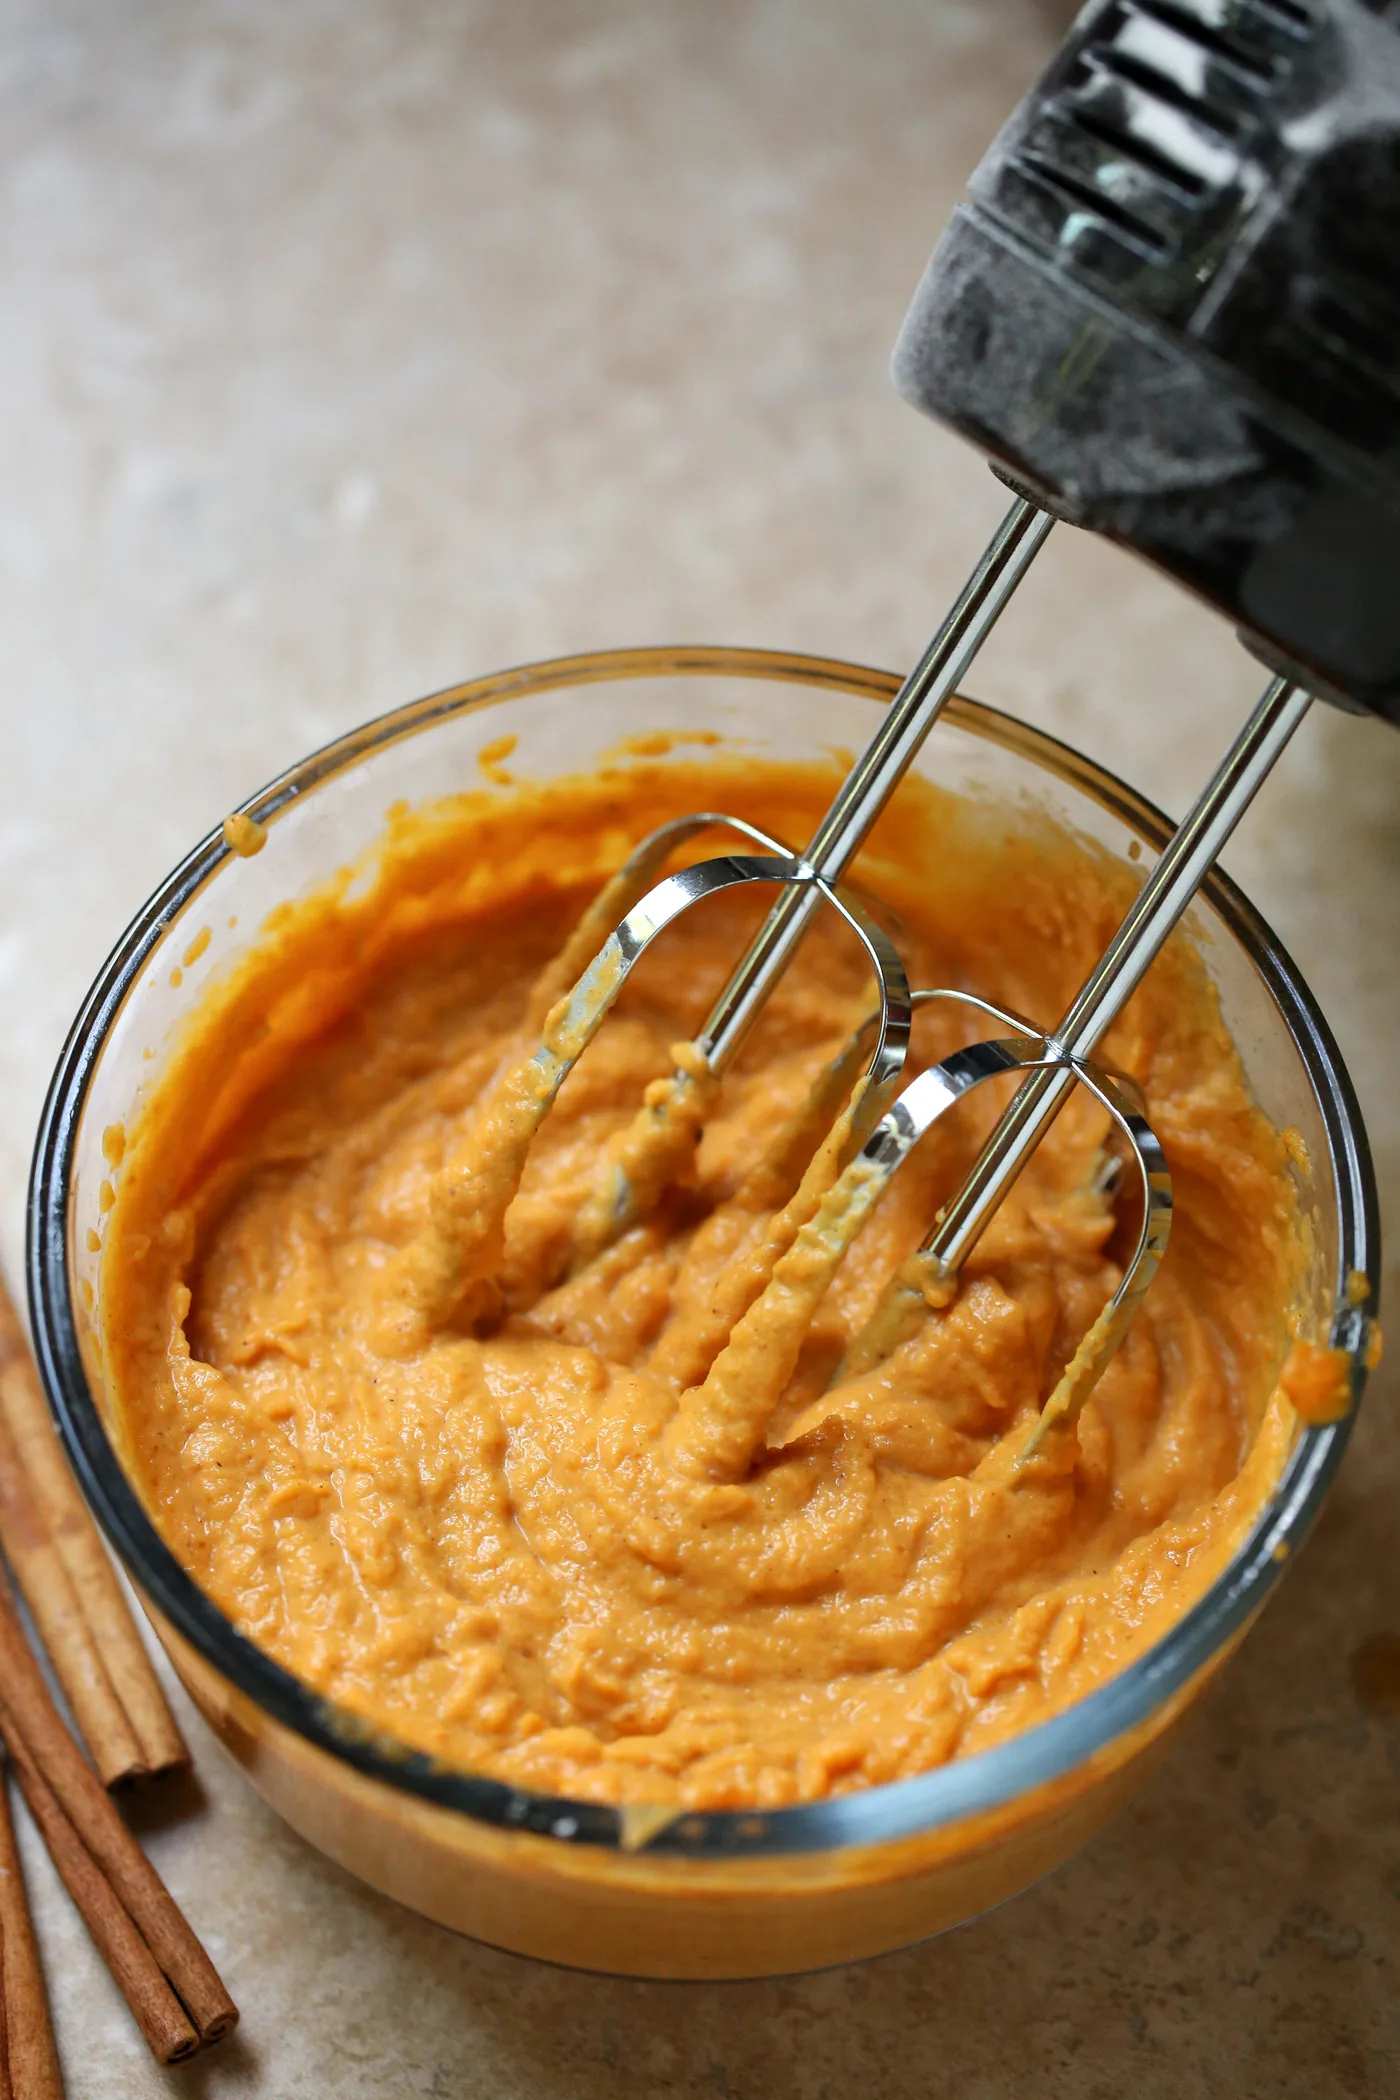 Mixing pumpkin puree, heavy cream, and pumpkin pie spice in a bowl with a hand mixer